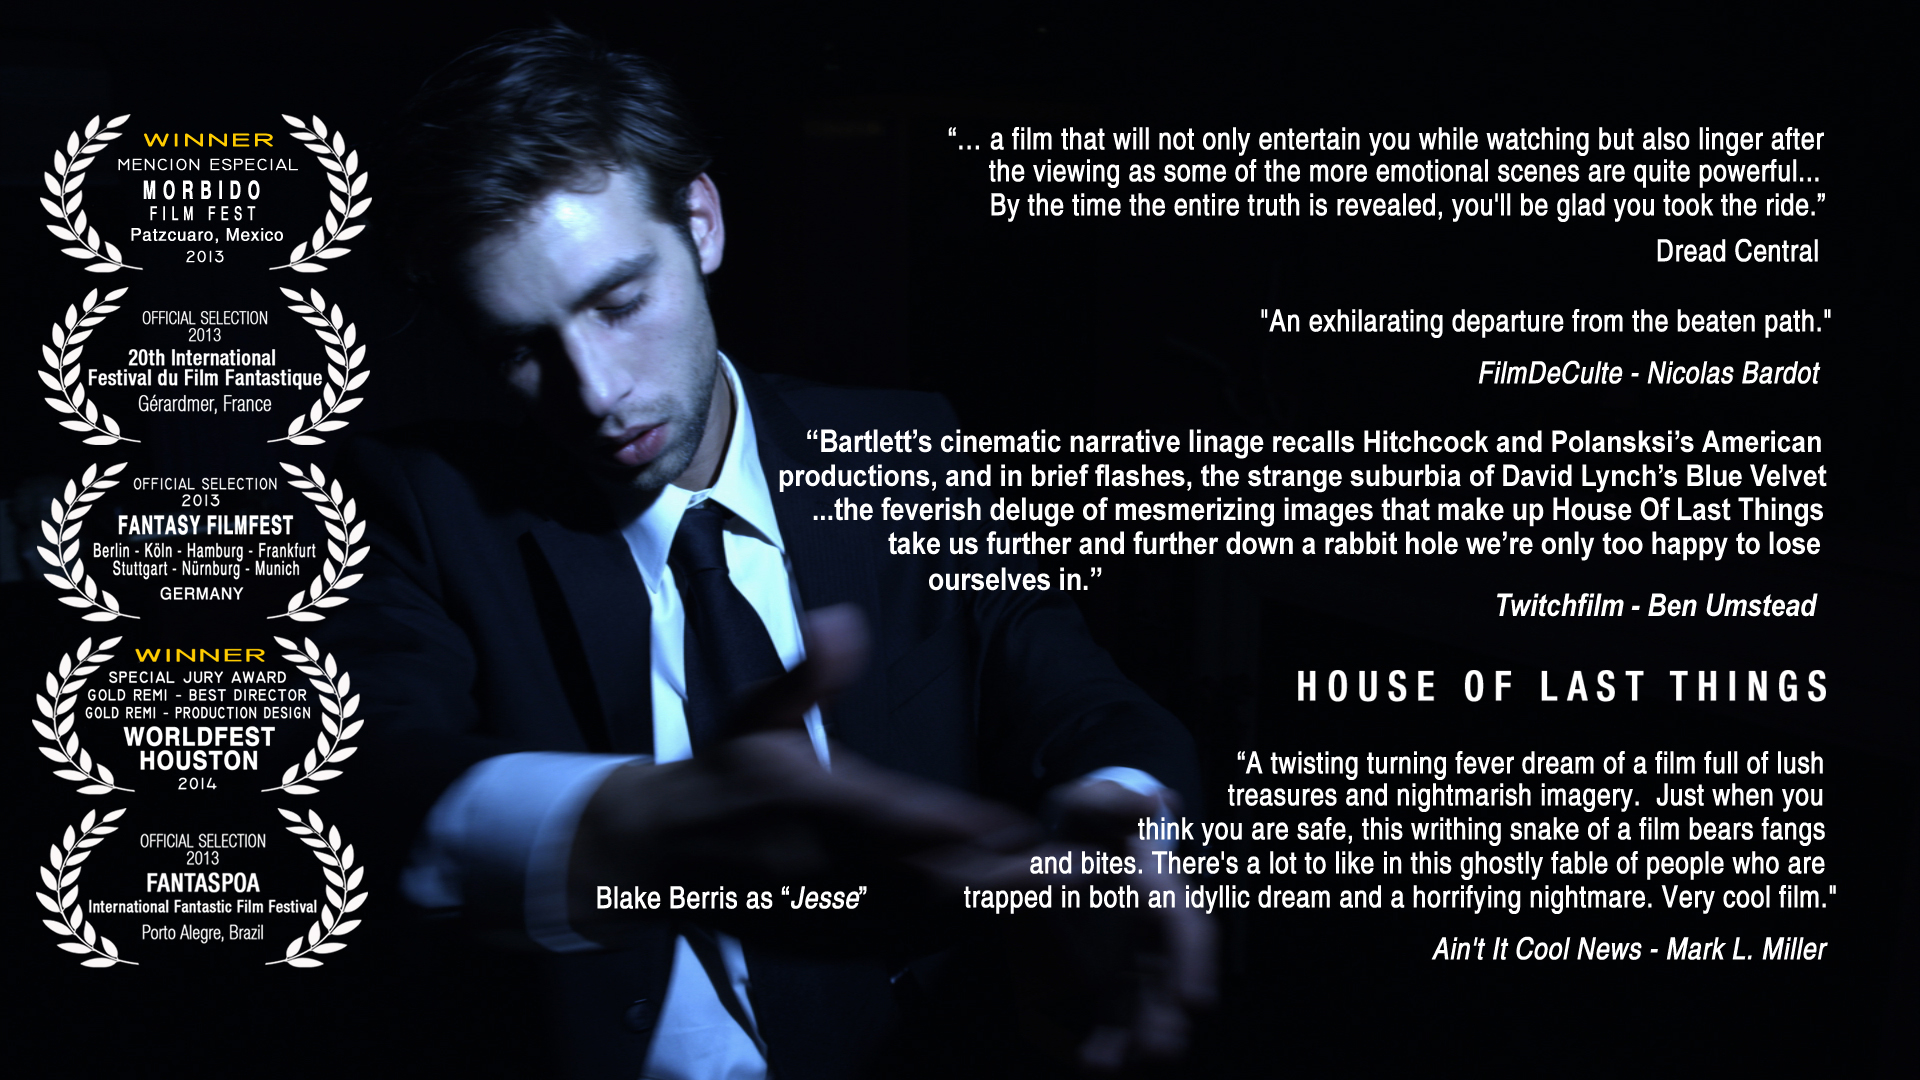 Jesse (Blake Berris) has succumbed to the will of the house.